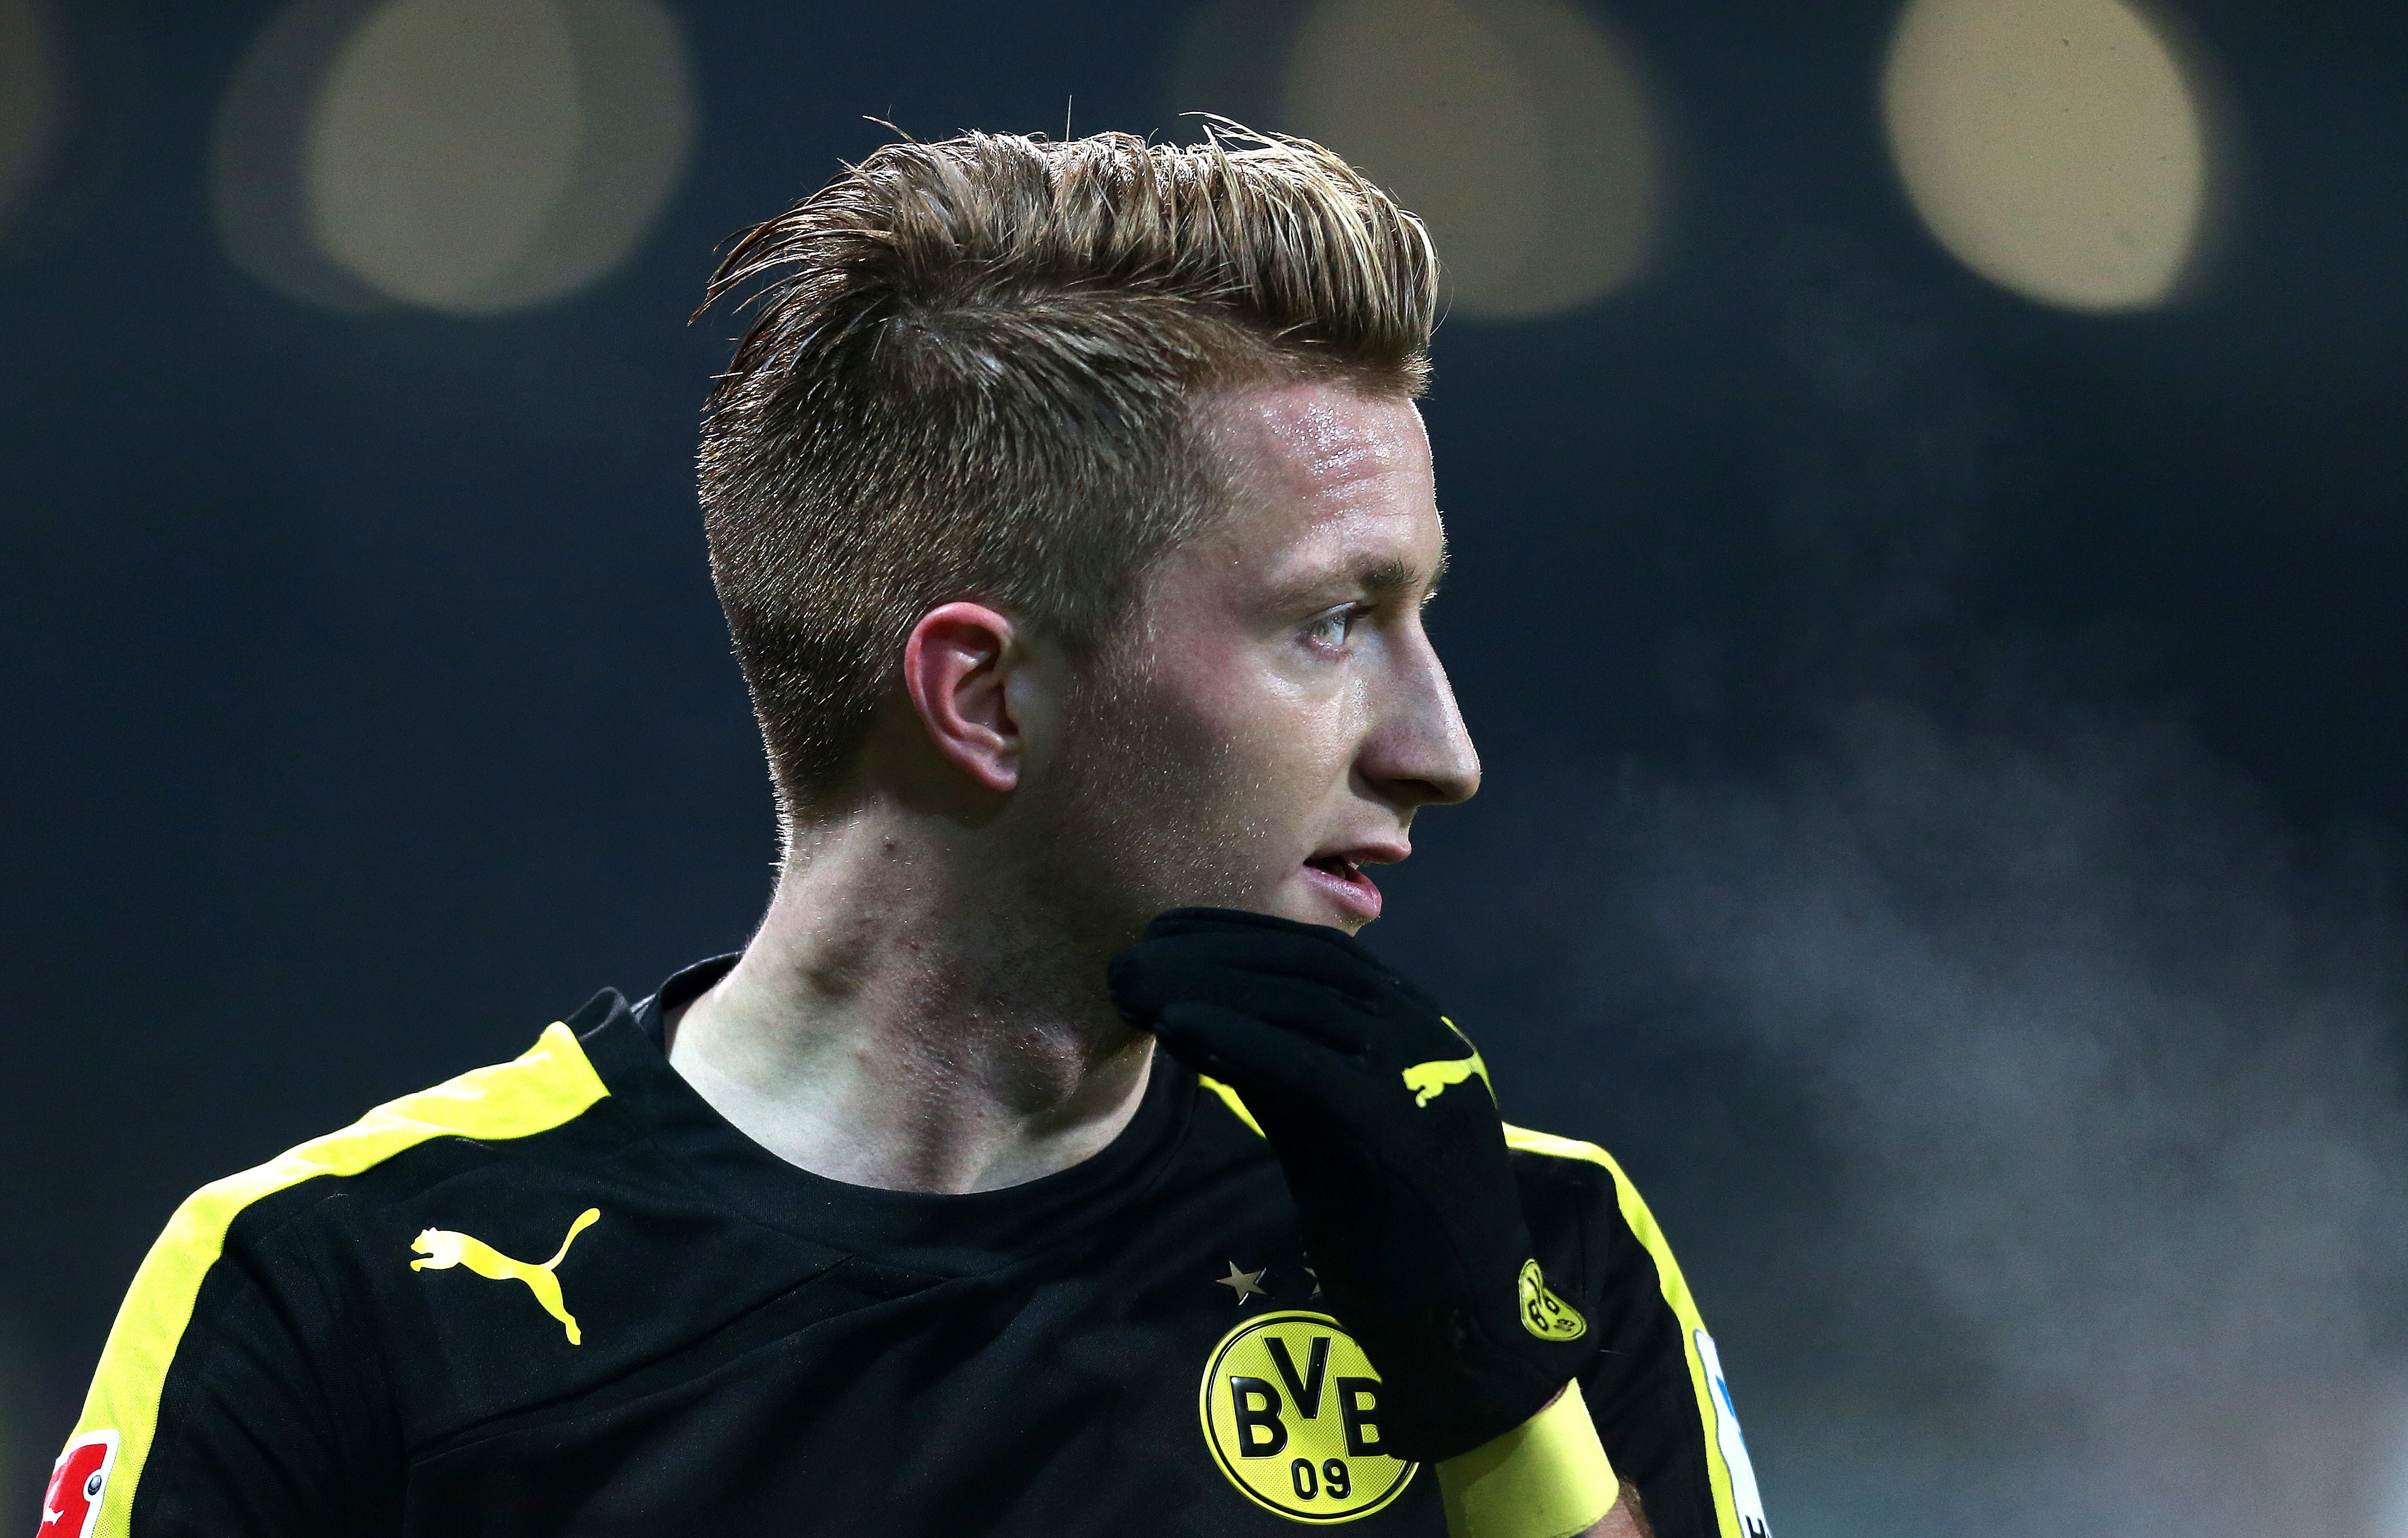 Officially Marco Reus extends his contract with Borussia Dortmund   PremierSeasoncom